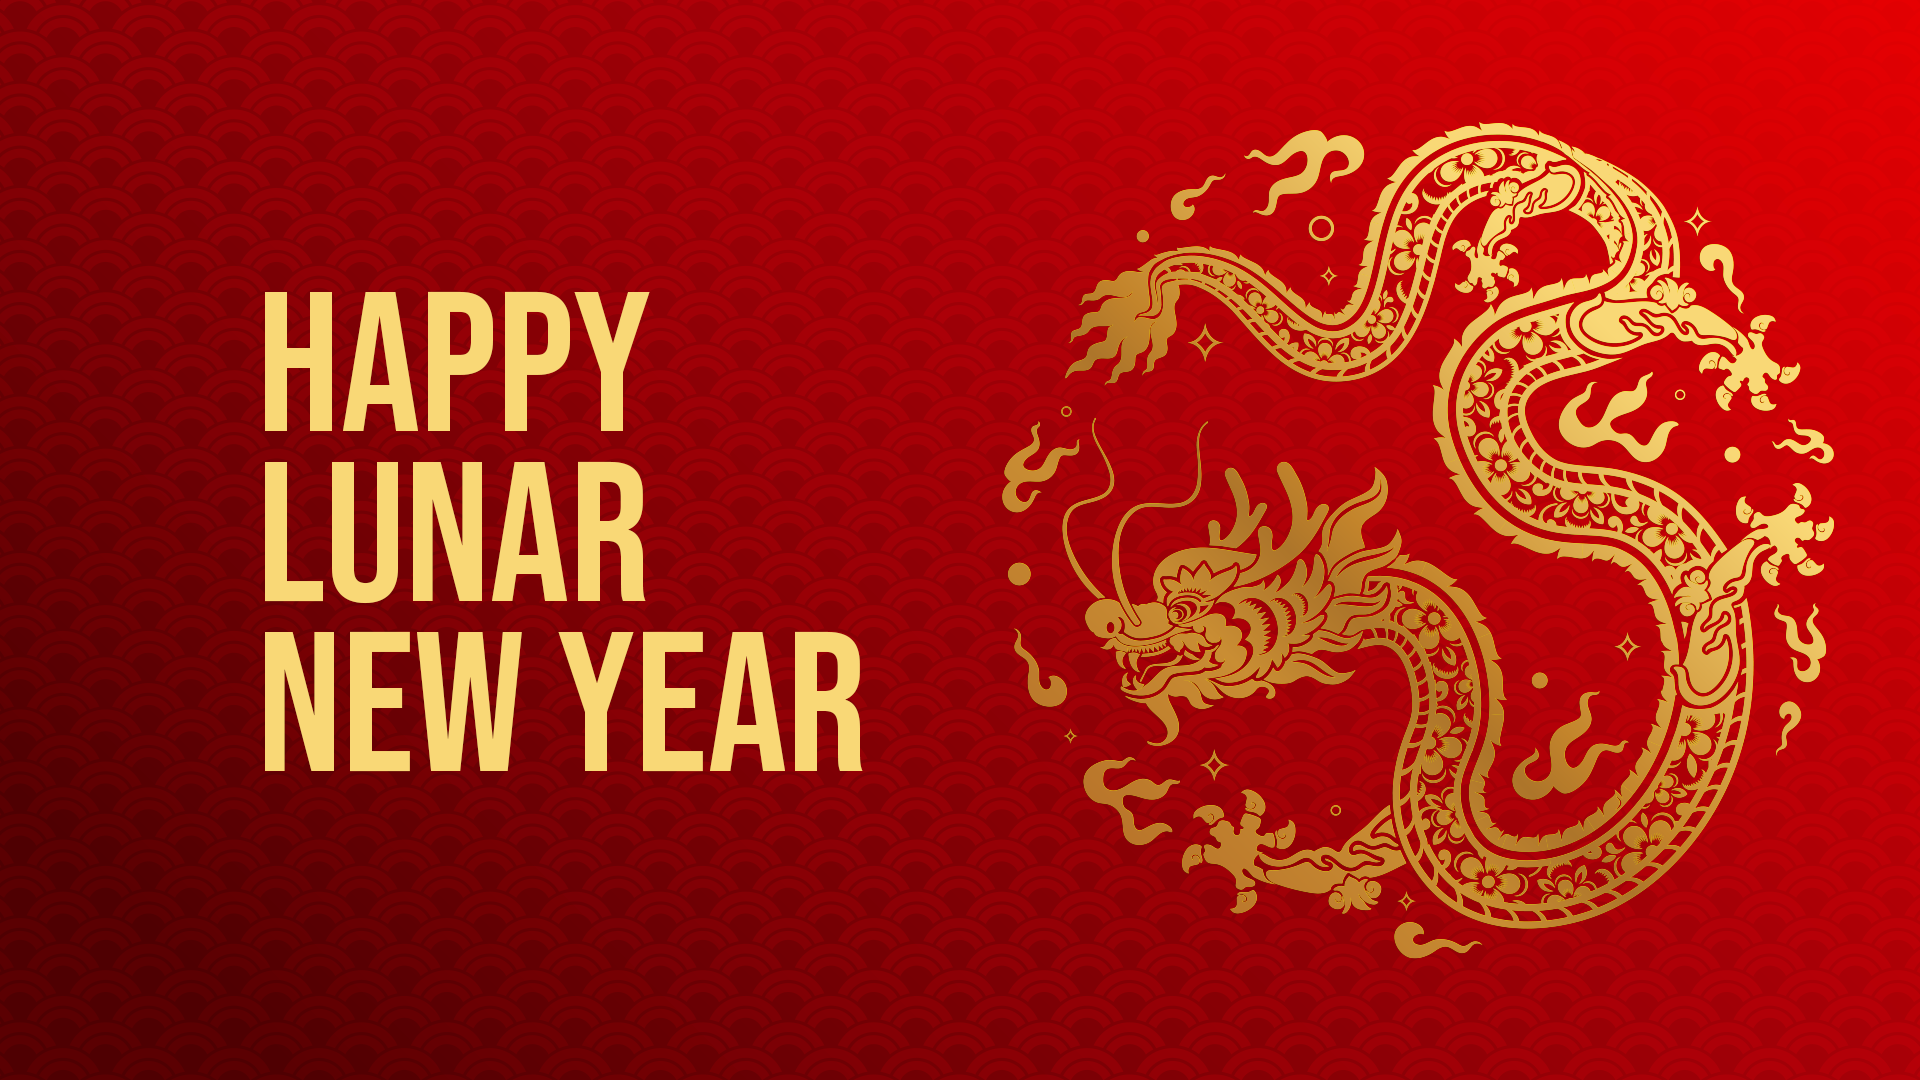 Happy Lunar New Year (the Year of the Wood Dragon)